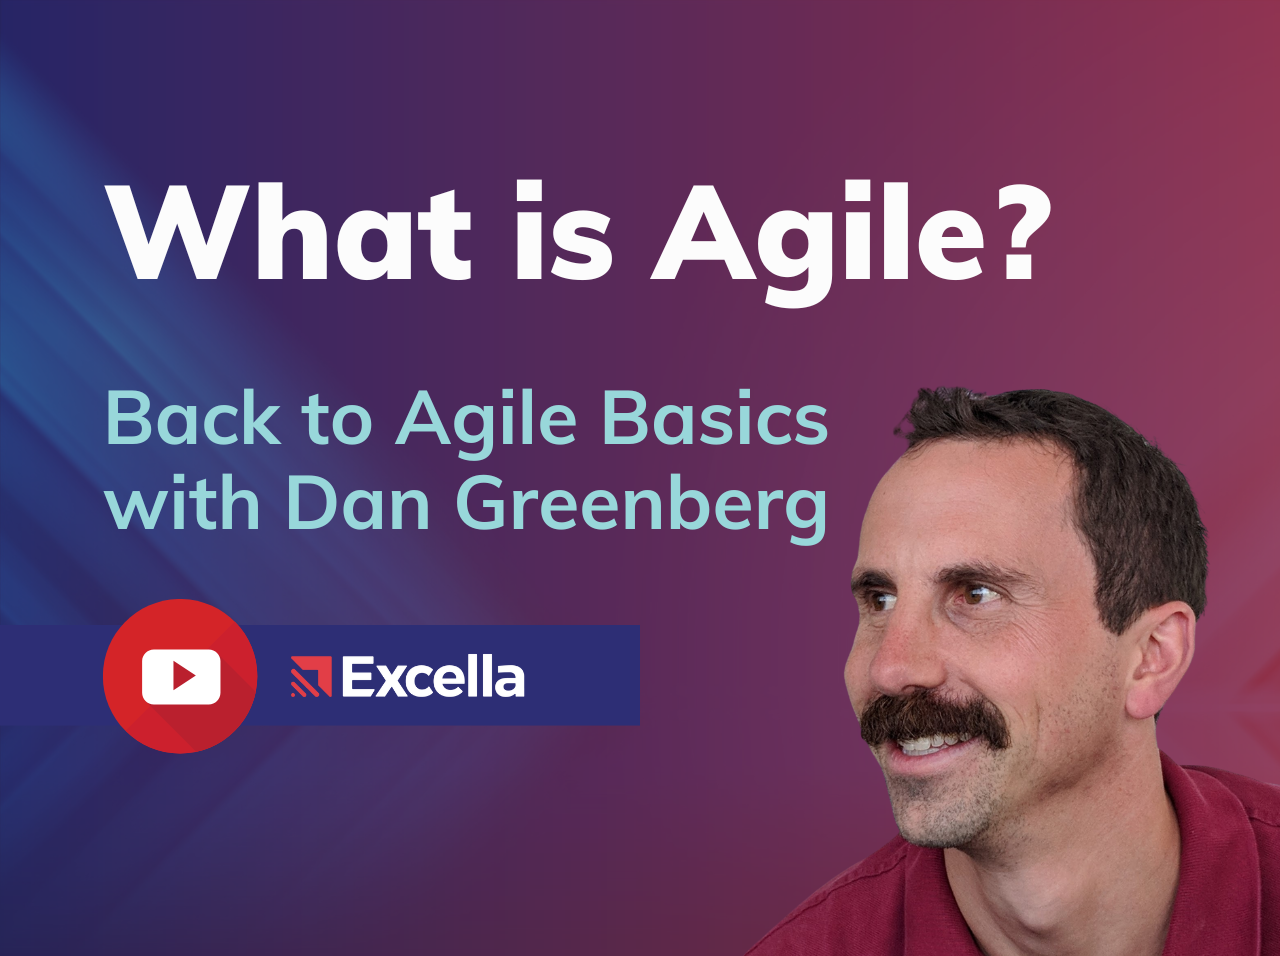 What is Agile? Back to Agile Basics with Dan Greenberg. Excella.